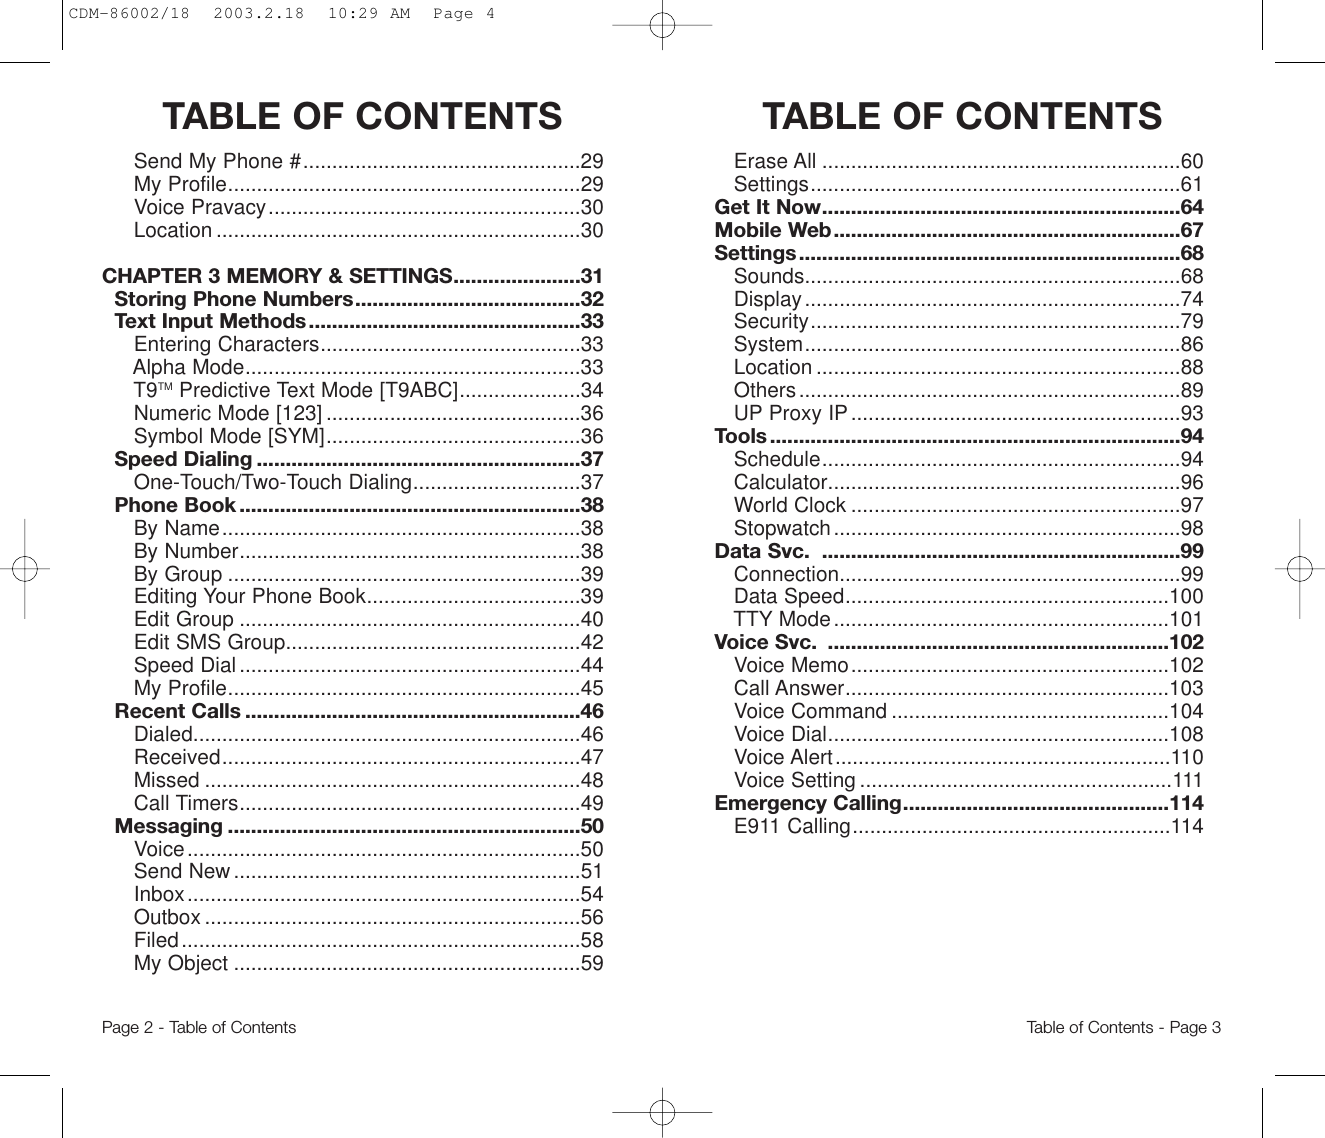 TABLE OF CONTENTS  TABLE OF CONTENTSErase All ..............................................................60Settings................................................................61Get It Now..............................................................64Mobile Web............................................................67Settings..................................................................68Sounds.................................................................68Display.................................................................74Security................................................................79System.................................................................86Location ...............................................................88Others..................................................................89UP Proxy IP.........................................................93Tools .......................................................................94Schedule..............................................................94Calculator.............................................................96World Clock .........................................................97Stopwatch............................................................98Data Svc.  ..............................................................99Connection...........................................................99Data Speed........................................................100TTY Mode..........................................................101Voice Svc.  ...........................................................102Voice Memo.......................................................102Call Answer........................................................103Voice Command ................................................104Voice Dial...........................................................108Voice Alert..........................................................110Voice Setting ......................................................111Emergency Calling..............................................114E911 Calling.......................................................114Send My Phone #................................................29My Profile.............................................................29Voice Pravacy......................................................30Location ...............................................................30CHAPTER 3 MEMORY &amp; SETTINGS......................31Storing Phone Numbers.......................................32Text Input Methods...............................................33Entering Characters.............................................33Alpha Mode..........................................................33T9TM Predictive Text Mode [T9ABC].....................34Numeric Mode [123] ............................................36Symbol Mode [SYM]............................................36Speed Dialing ........................................................37One-Touch/Two-Touch Dialing.............................37Phone Book ...........................................................38By Name..............................................................38By Number...........................................................38By Group .............................................................39Editing Your Phone Book.....................................39Edit Group ...........................................................40Edit SMS Group...................................................42Speed Dial...........................................................44My Profile.............................................................45Recent Calls ..........................................................46Dialed...................................................................46Received..............................................................47Missed .................................................................48Call Timers...........................................................49Messaging .............................................................50Voice....................................................................50Send New............................................................51Inbox....................................................................54Outbox .................................................................56Filed.....................................................................58My Object ............................................................59Page 2 - Table of Contents Table of Contents - Page 3CDM-86002/18  2003.2.18  10:29 AM  Page 4